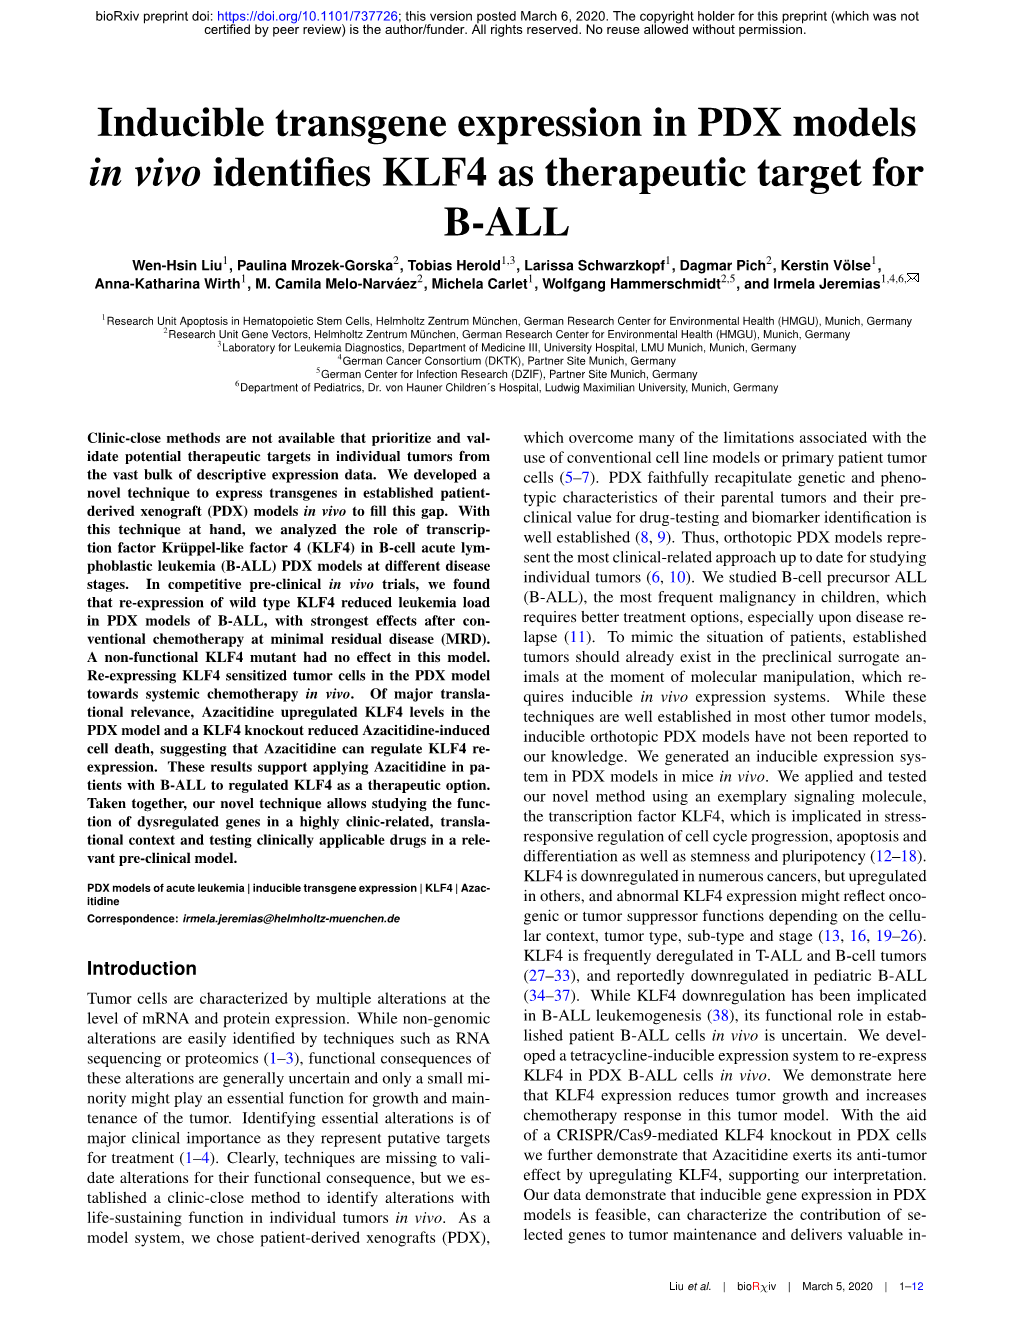 Inducible Transgene Expression in PDX Models in Vivo Identifies KLF4 As Therapeutic Target for B-ALL